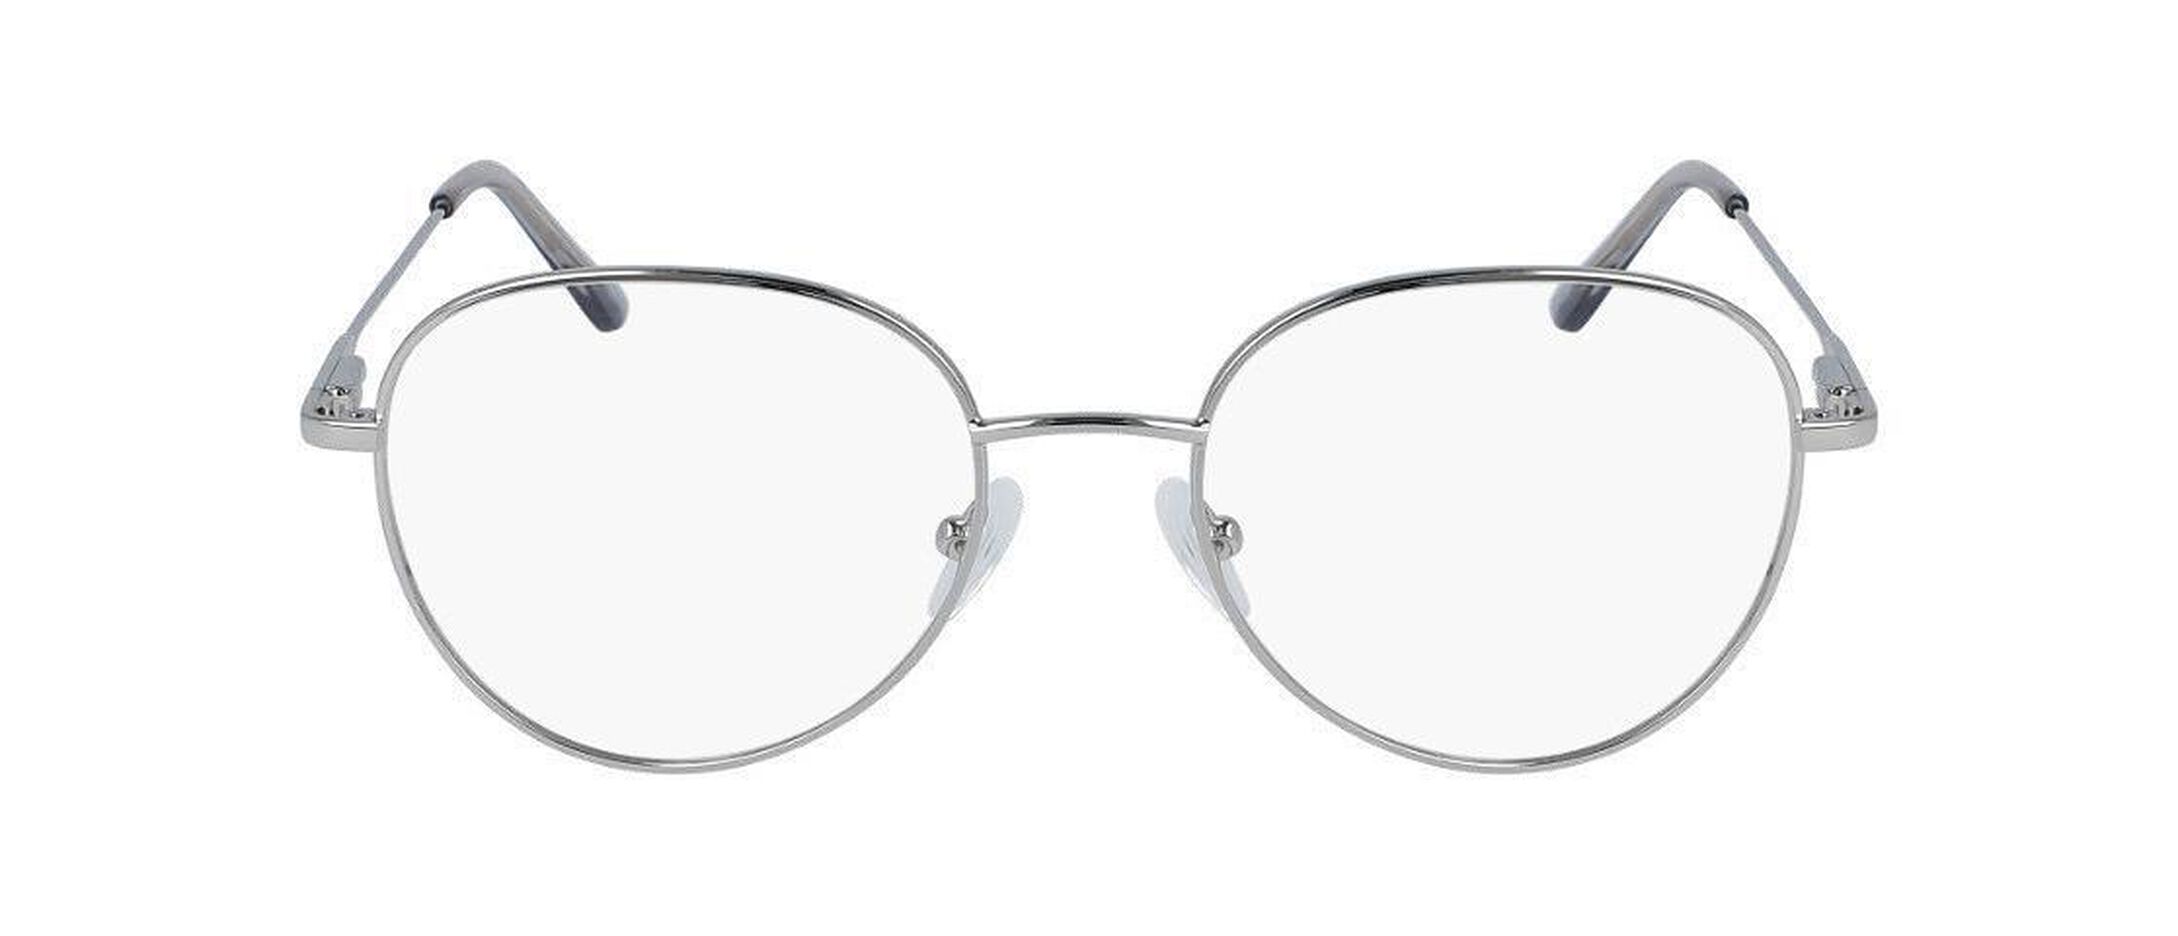 Calvin Klein CK19130 Glasses | Free Shipping and Returns | Eyeconic